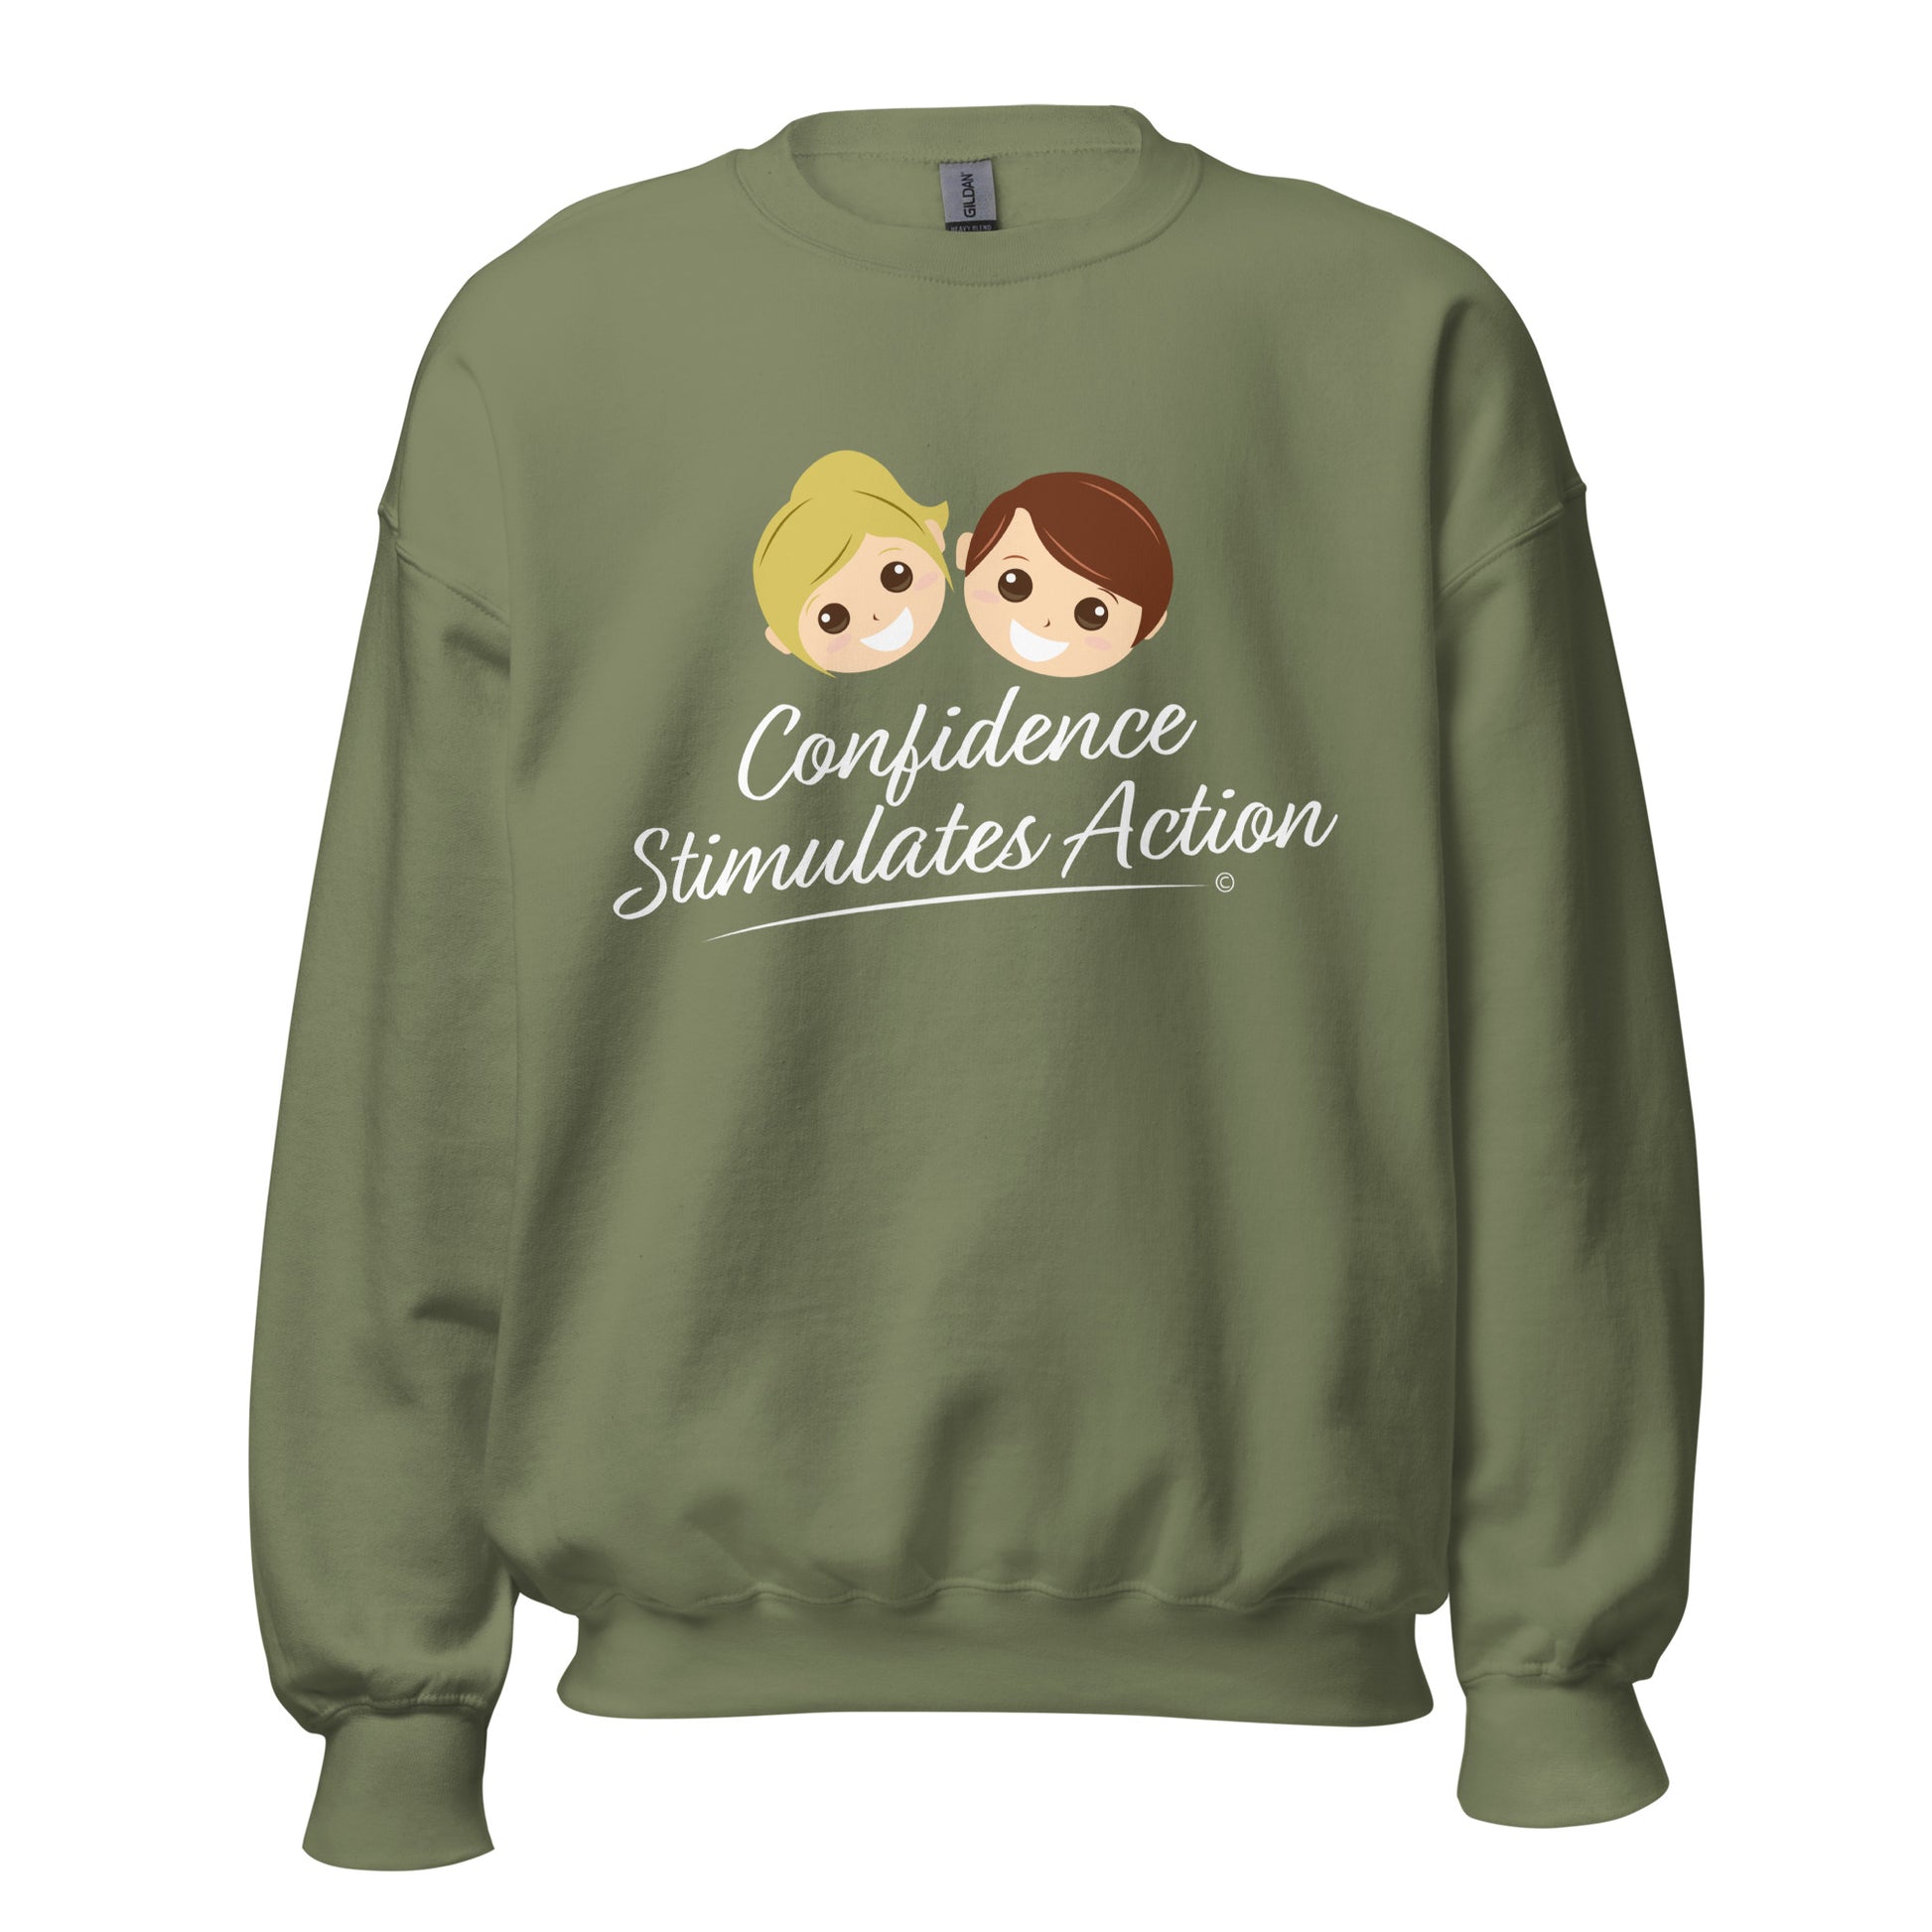 Sweatshirts for wilderness and camping -Military Green